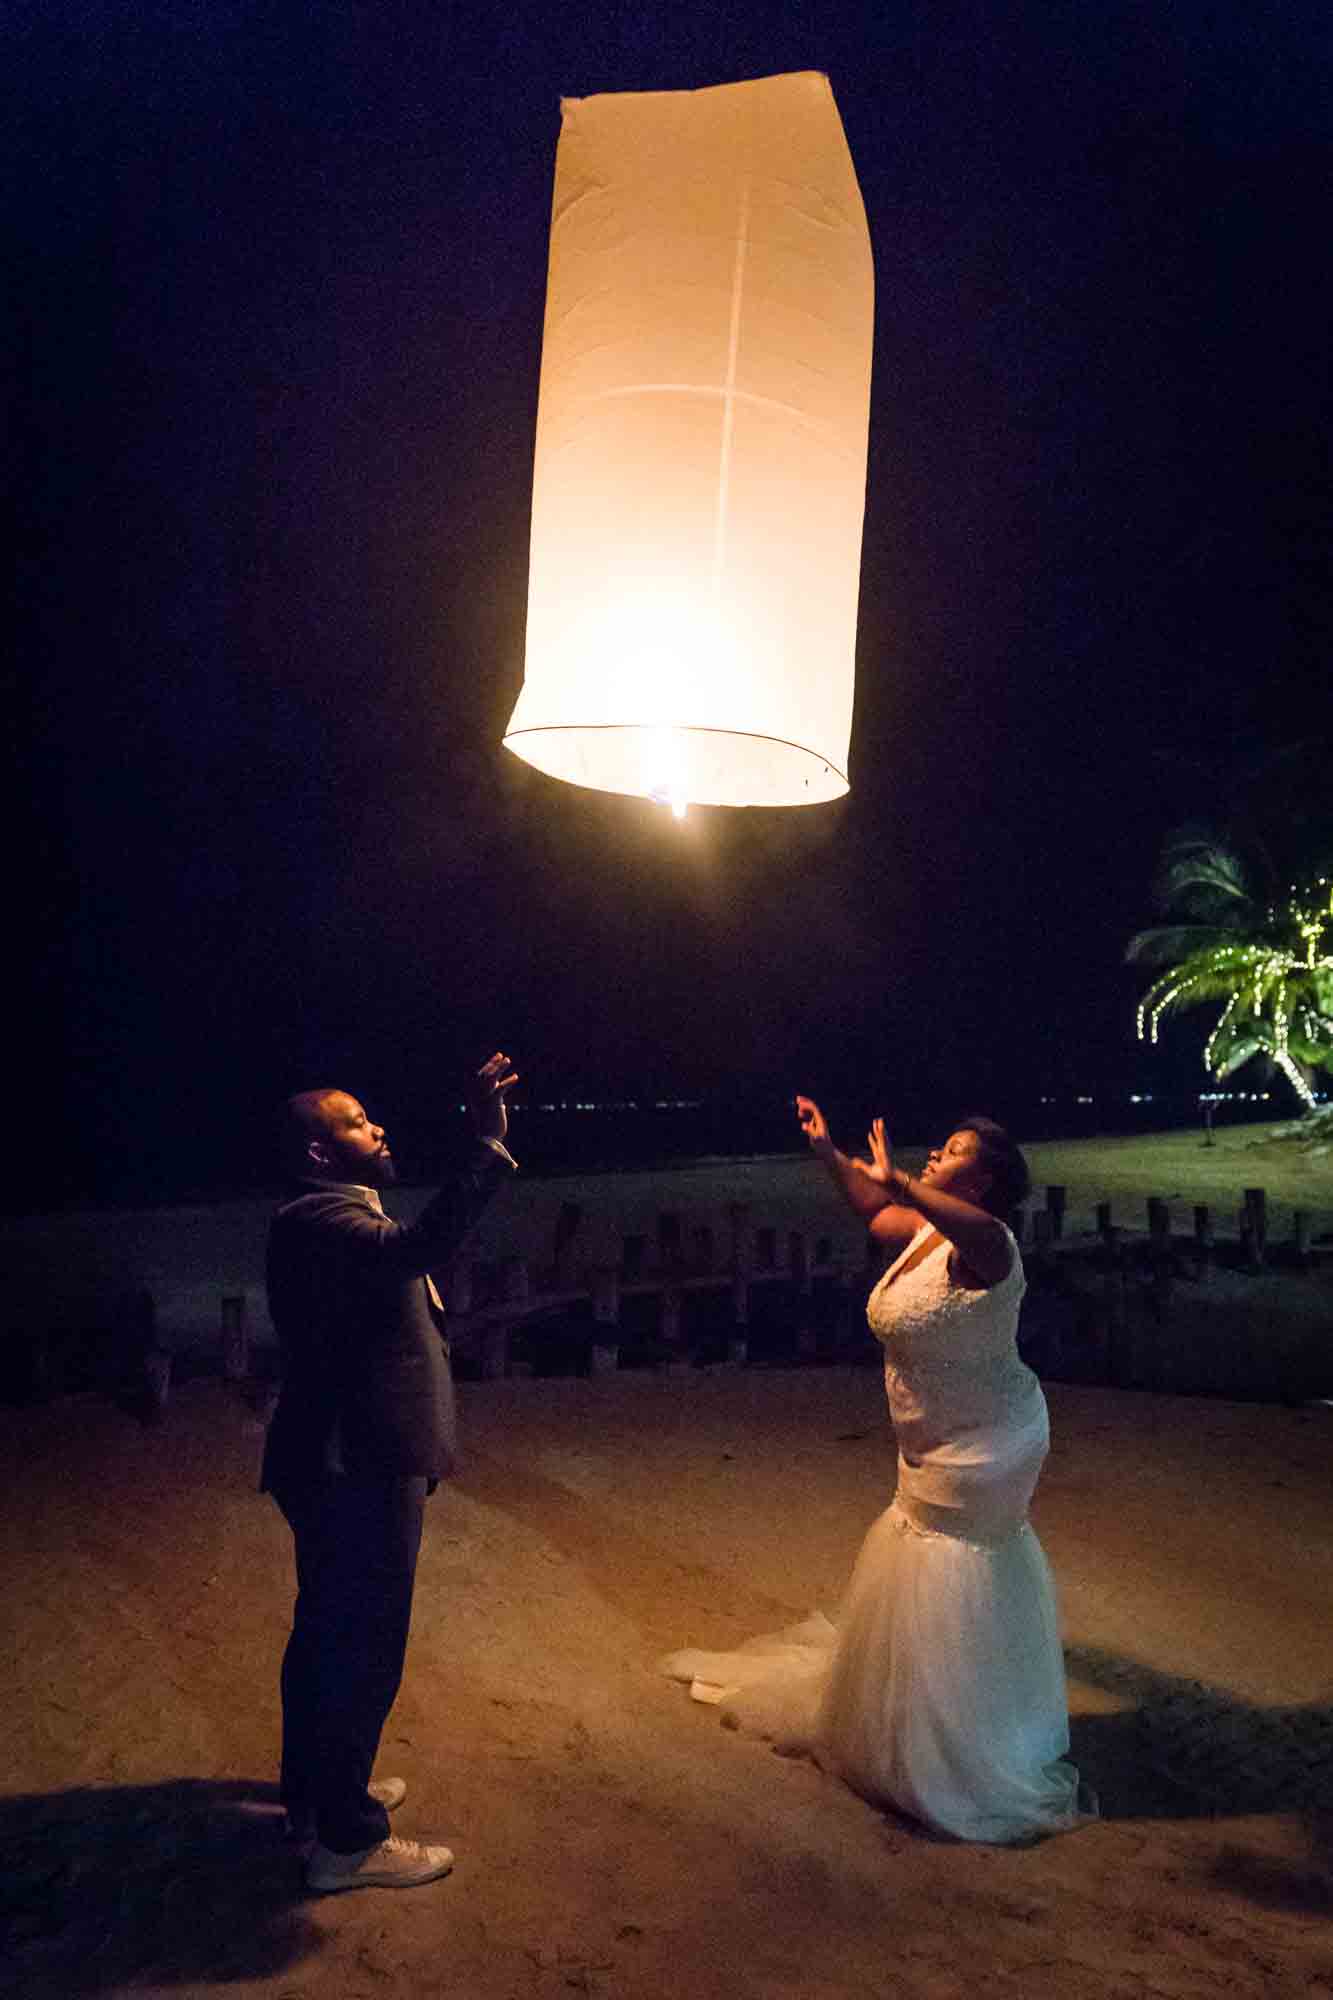 Bride and groom with lantern for an article on destination wedding photography tips